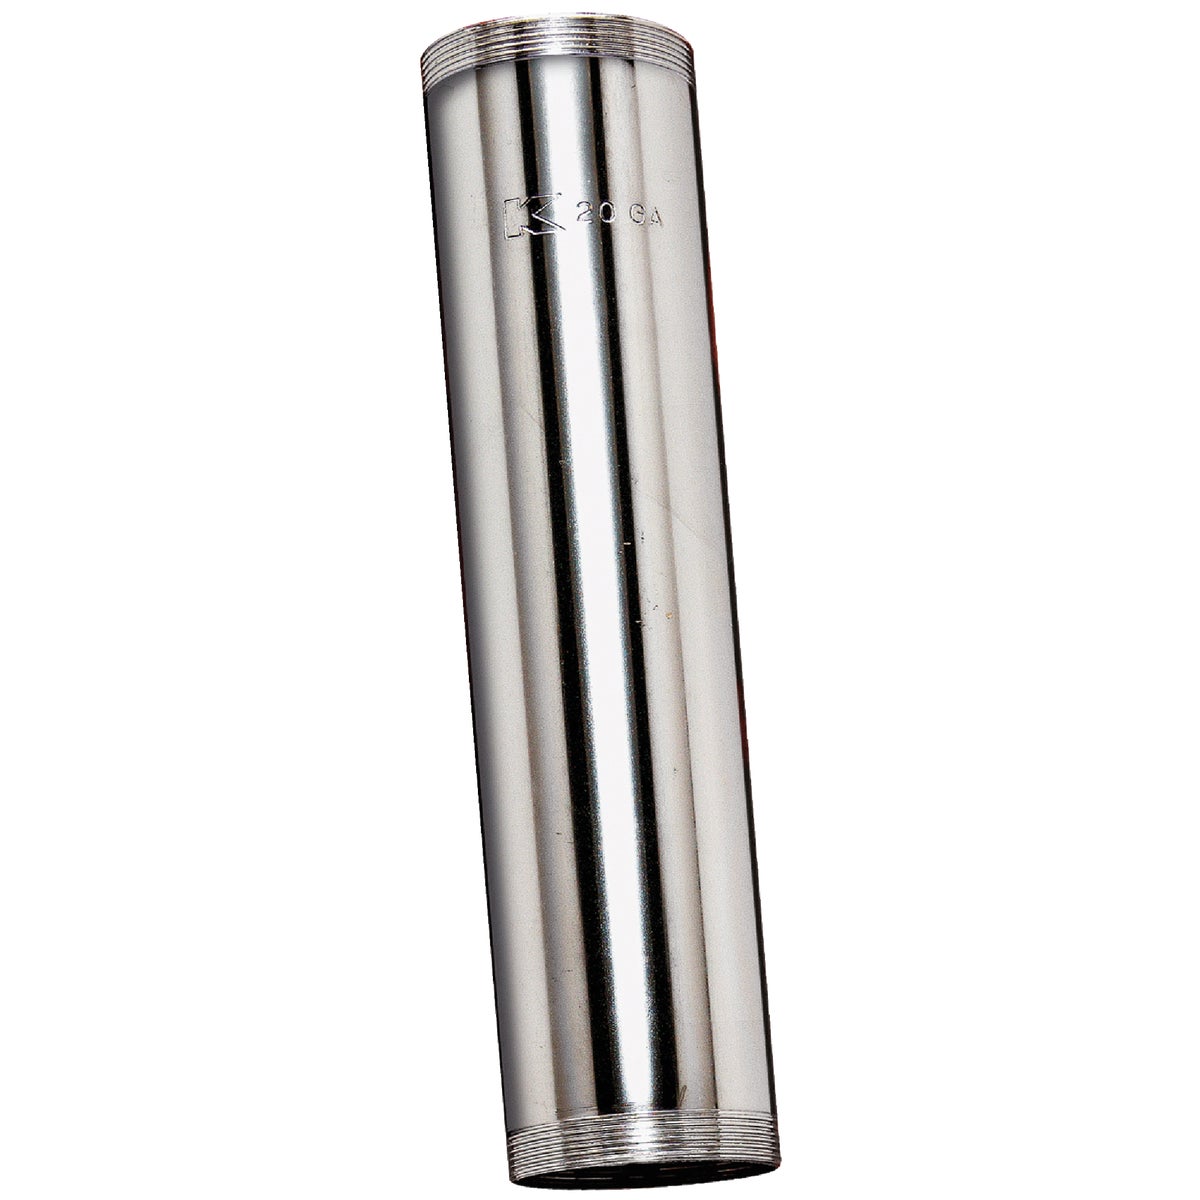 Do it 1-1/4 In. x 6 In. Chrome Plated 20 Gauge Threaded Tube